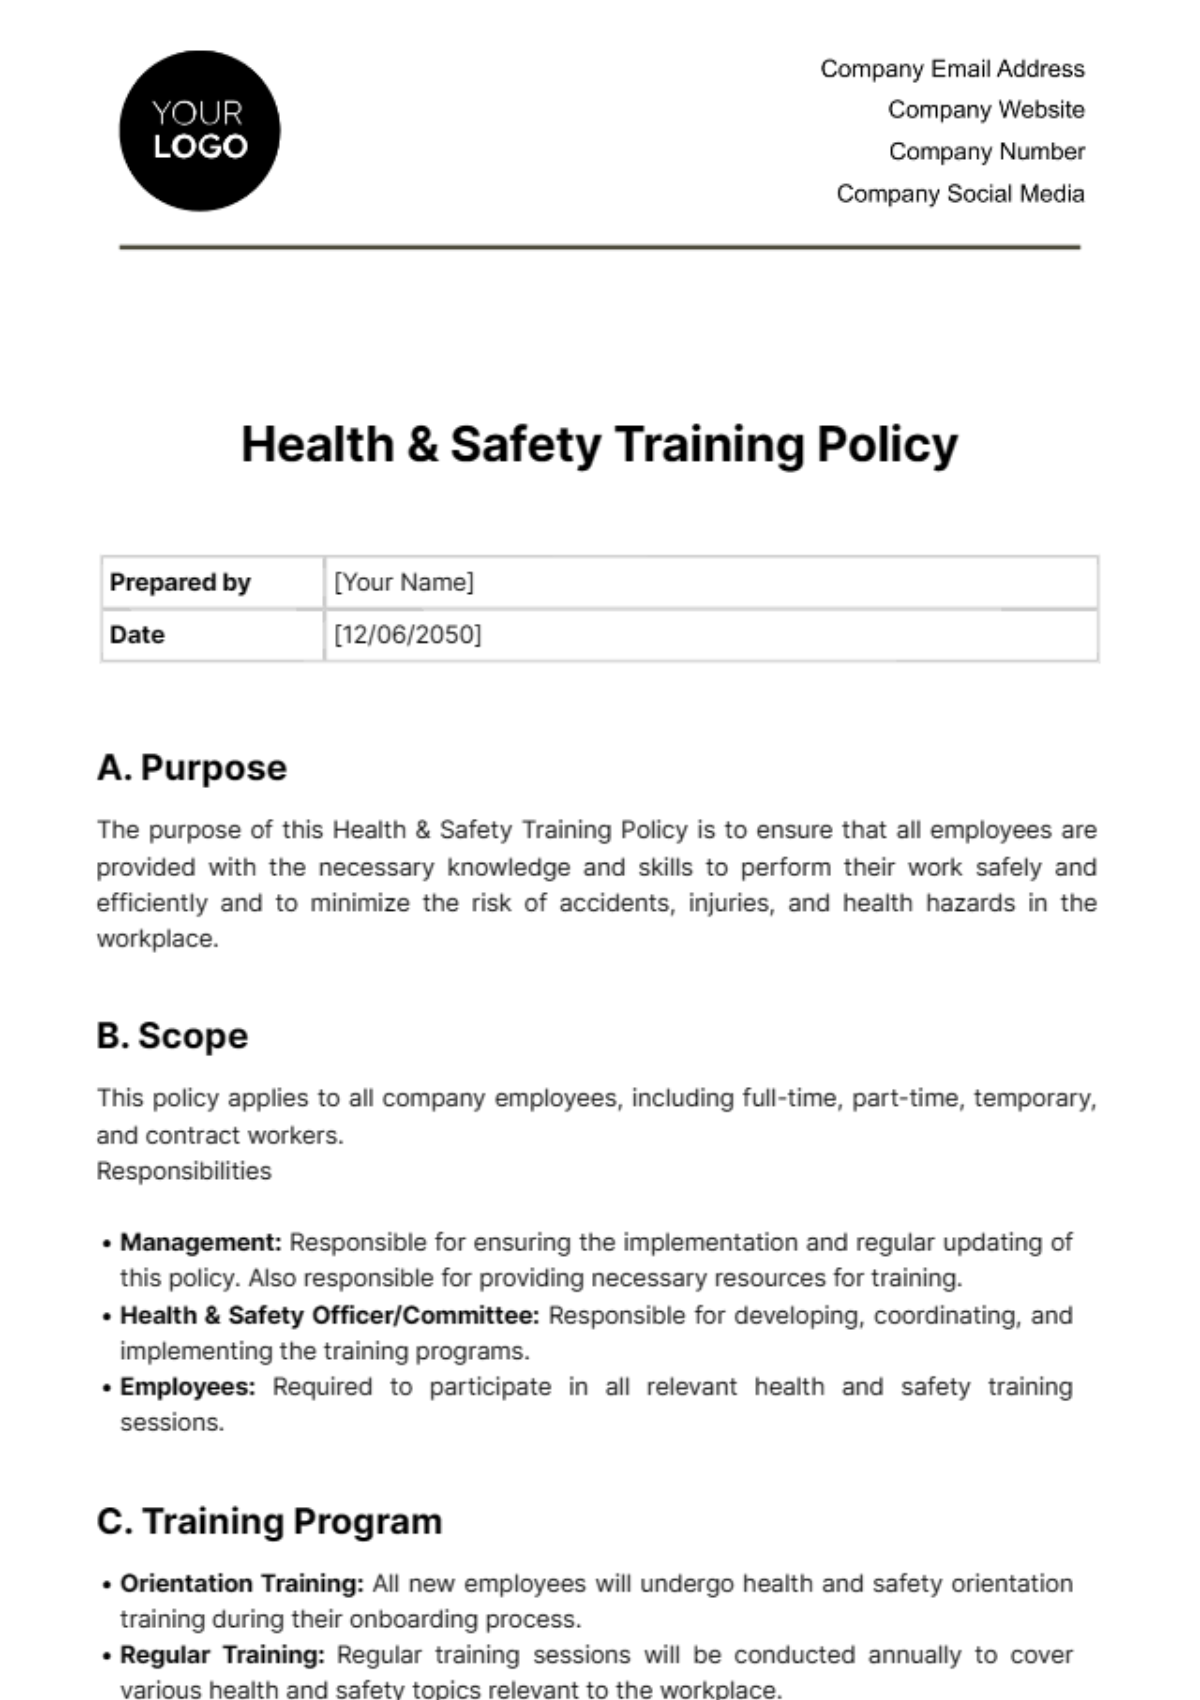 Free Health & Safety Training Policy Template